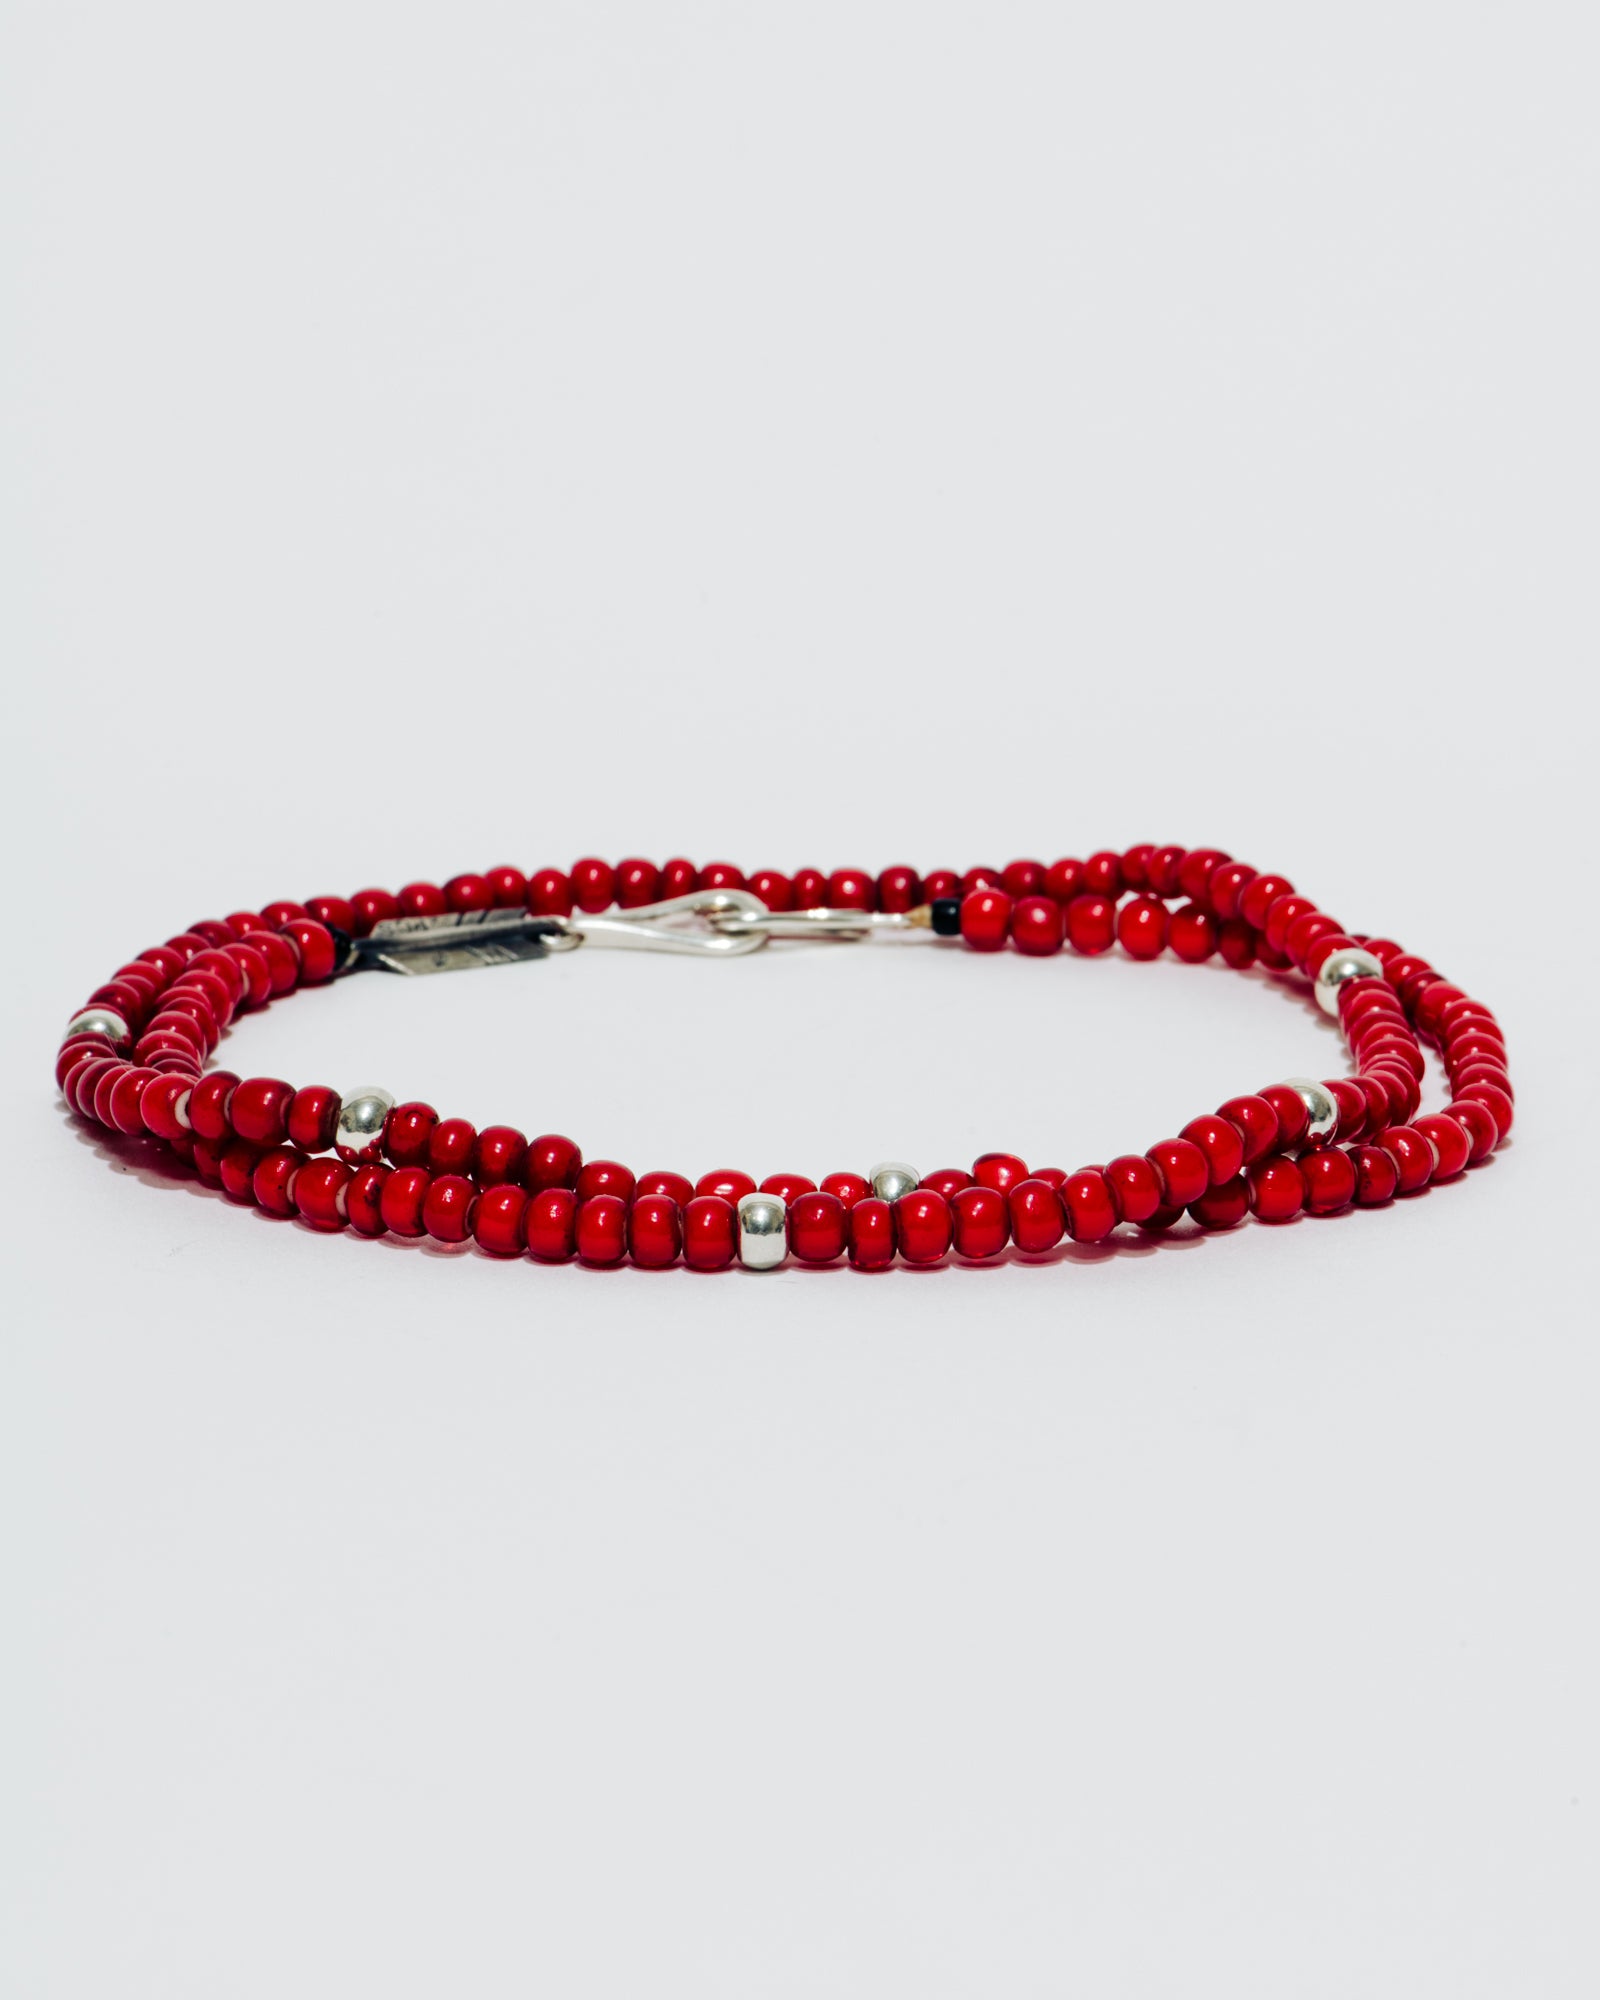 Antique Red Glass Beaded Necklace